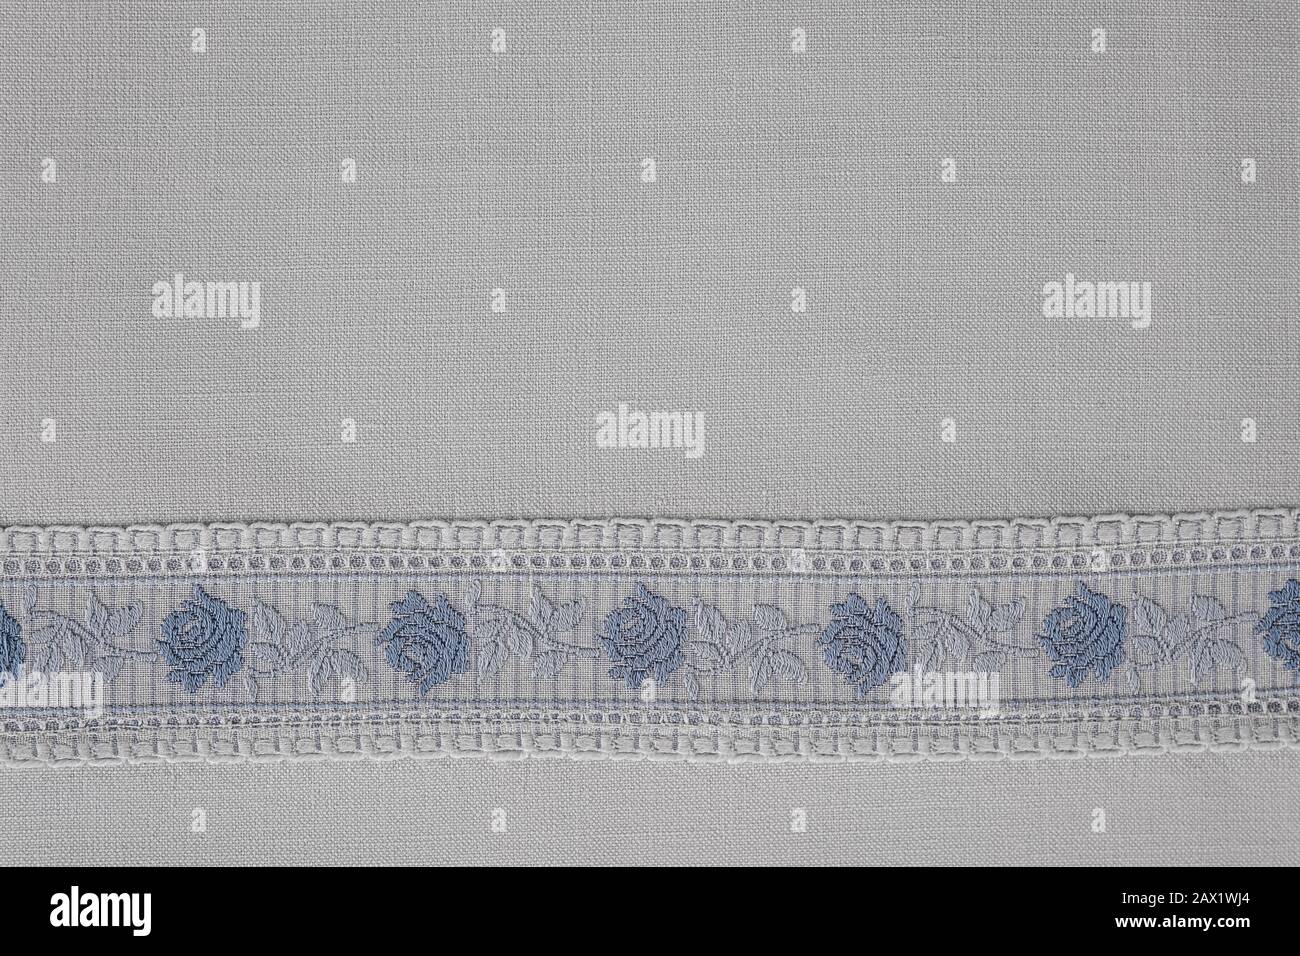 Embroidered border with roses in blue white on a white cotton table cloth Stock Photo